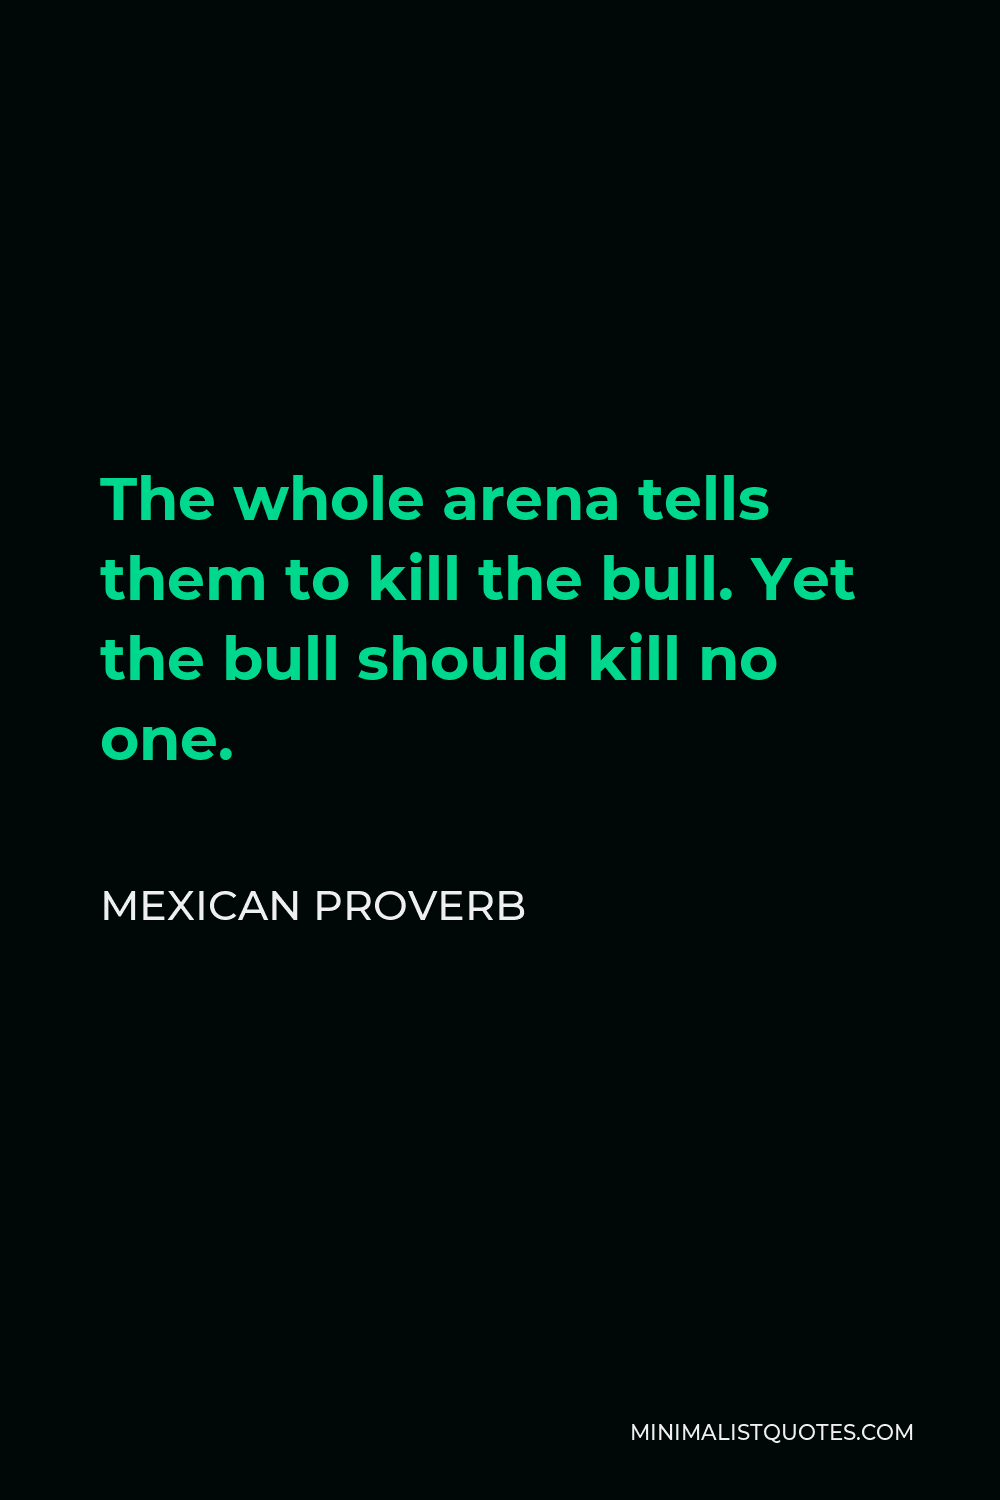 Mexican Proverb Quote - The whole arena tells them to kill the bull. Yet the bull should kill no one.